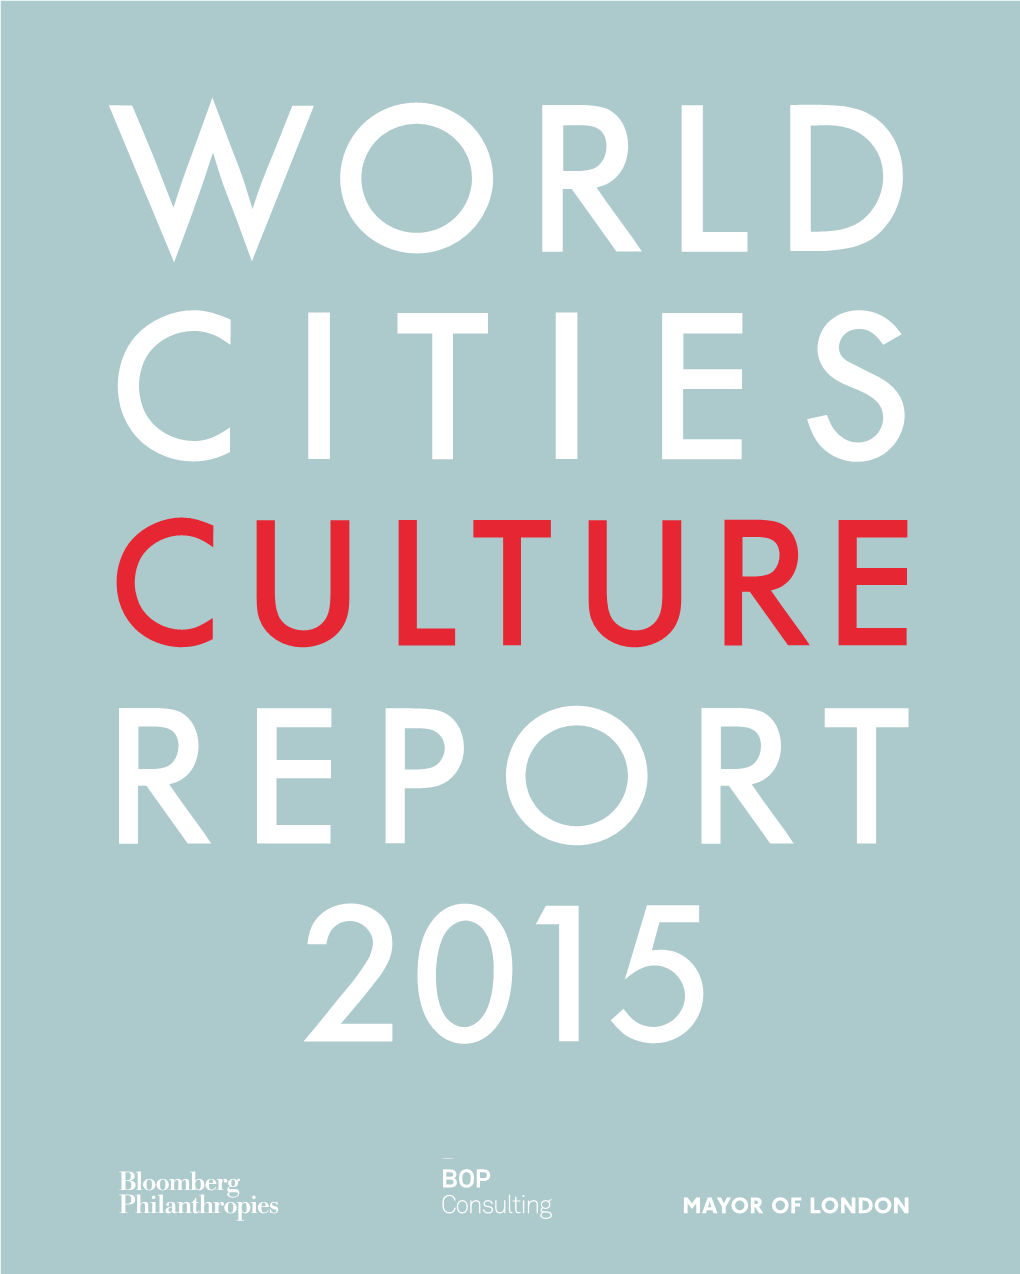 World Cities Culture Report 2015 So We Need a Paradigm Shift in Global Cities, We Need Culture at the Top Table If We Are to Build Liveable Flourishing Cities